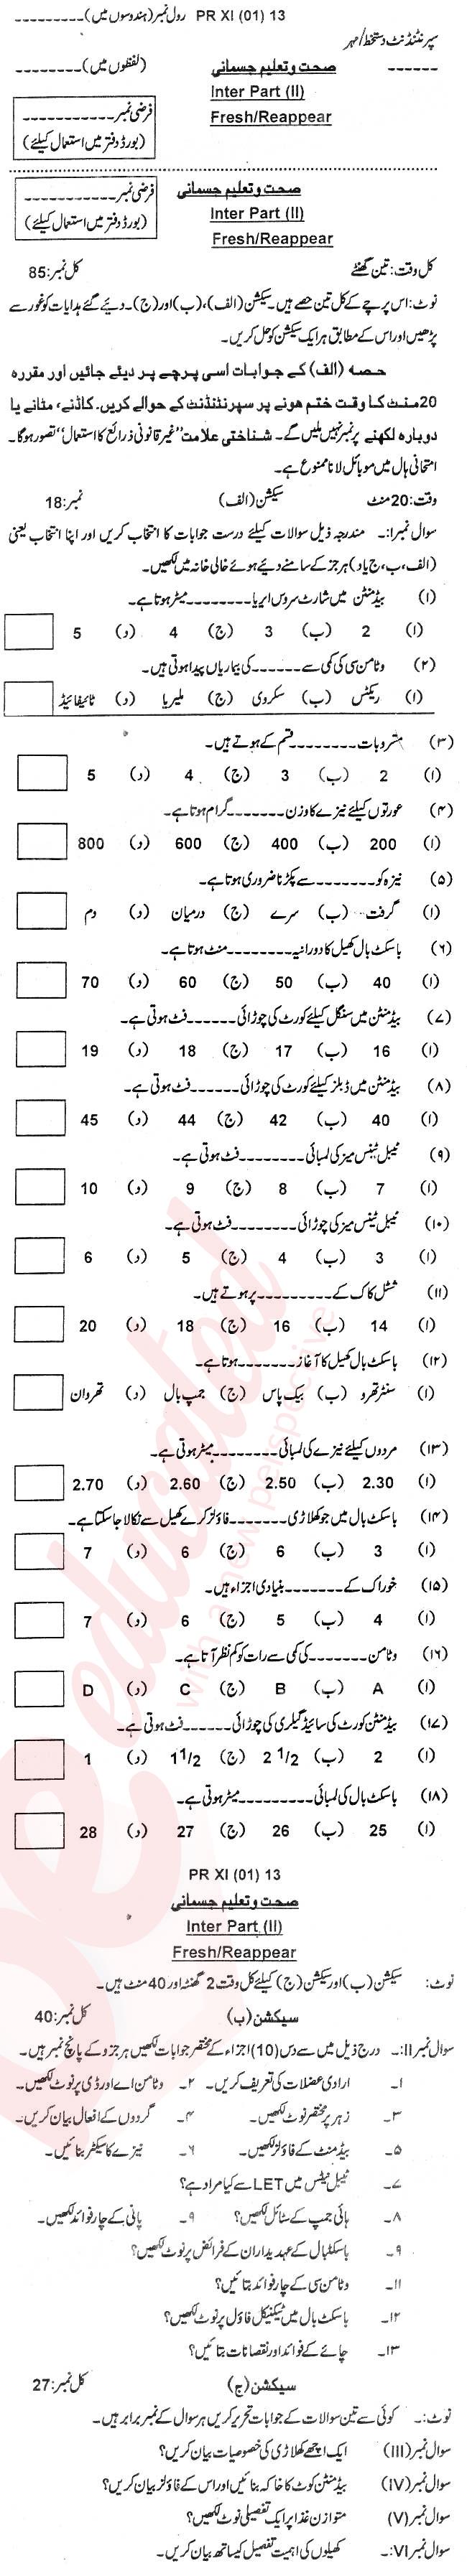 Health and Physical Education FA Part 2 Past Paper Group 1 BISE Abbottabad 2013